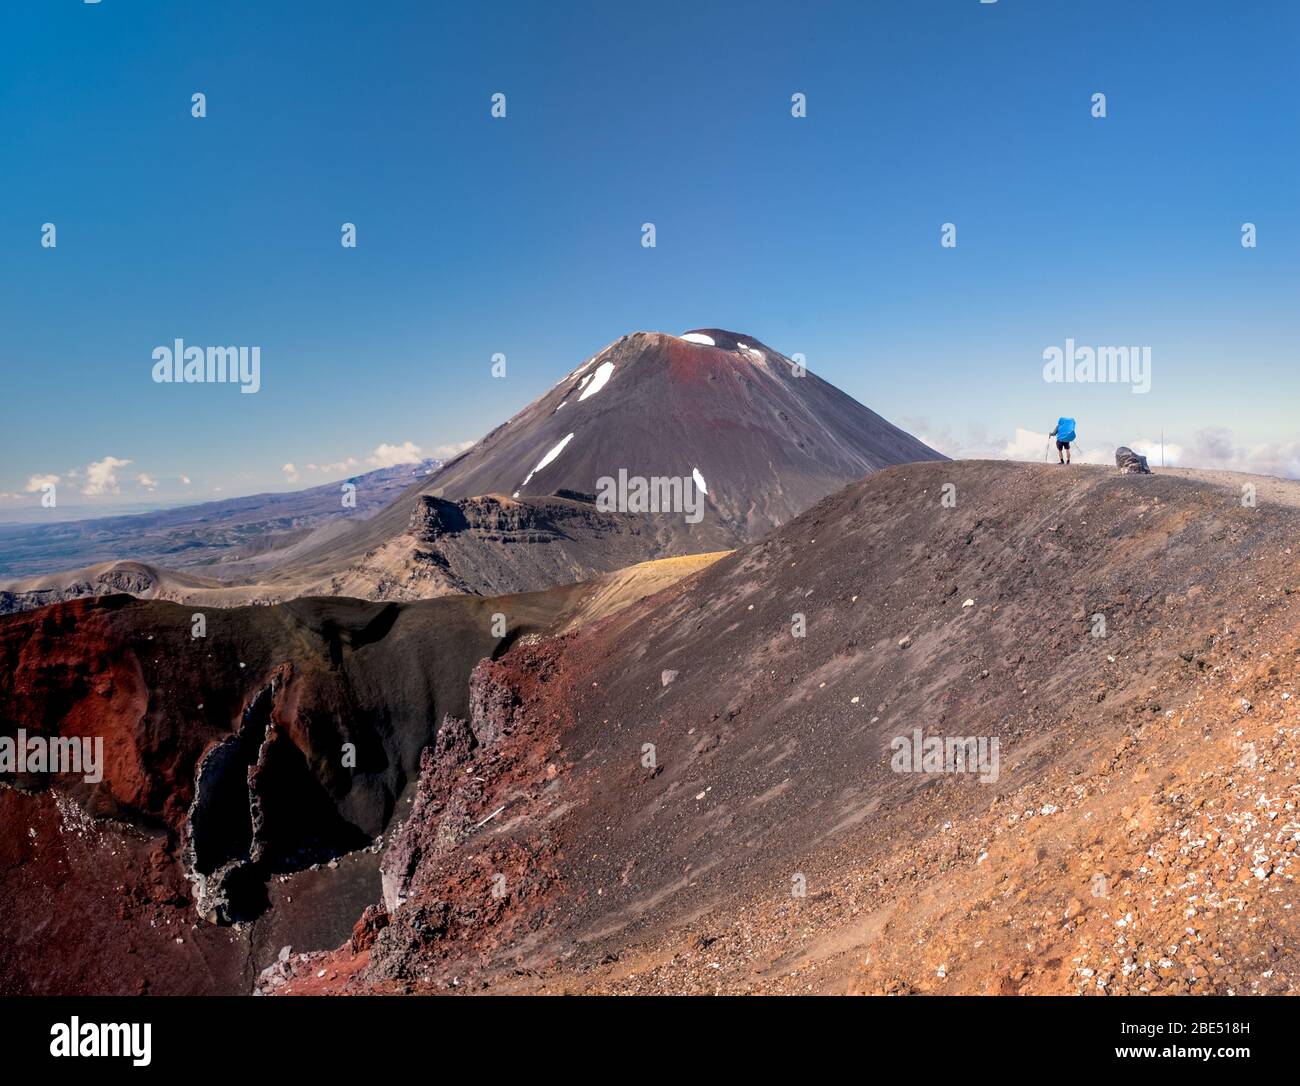 Backpacker looking at Mt Ngauruhoe (aka Mt Doom) and Red Crater in New Zealand’s Tongariro national park. Stock Photo